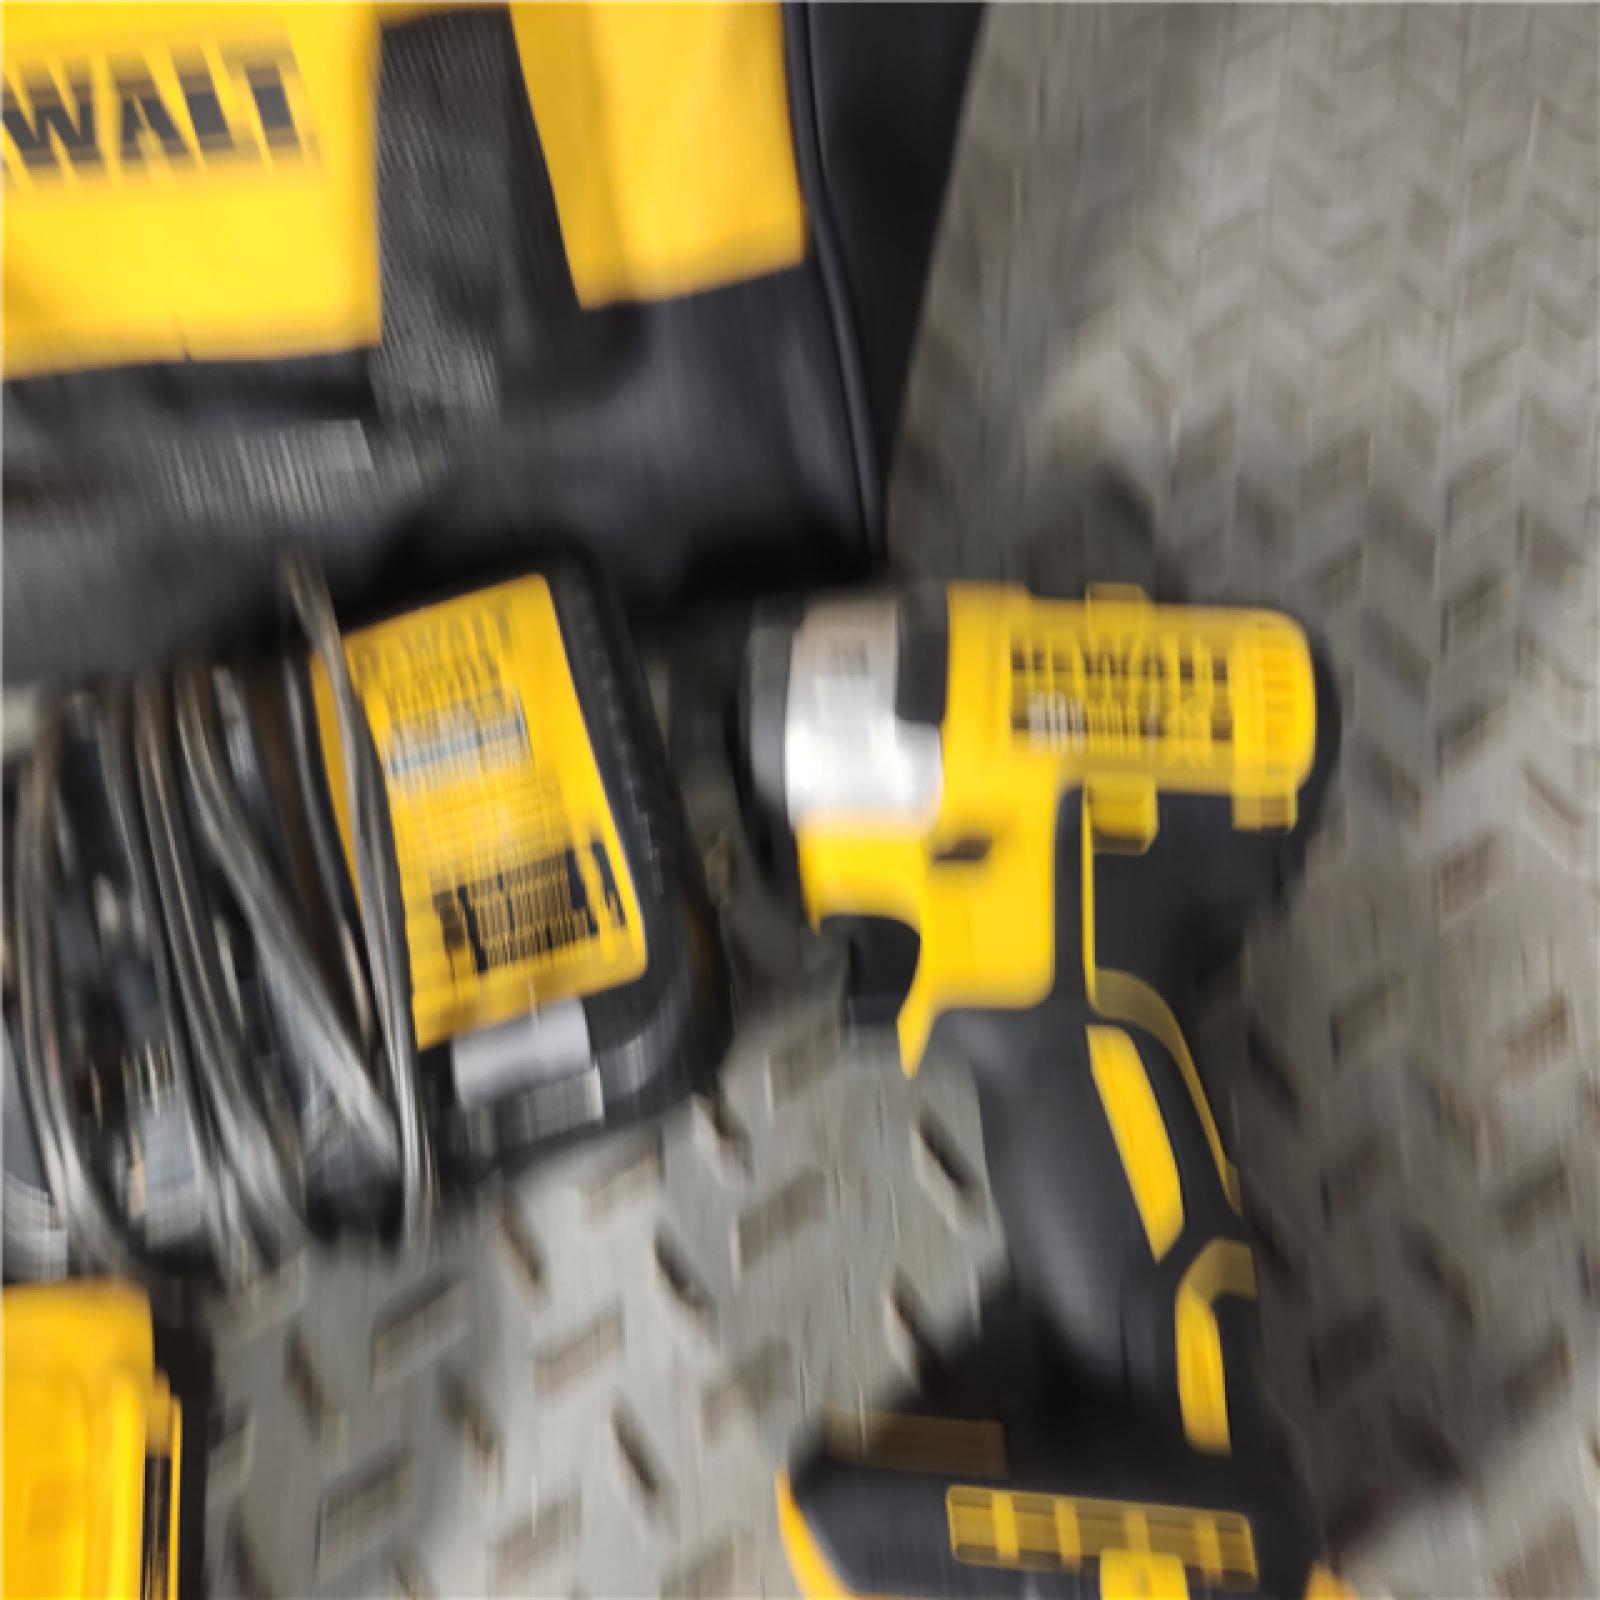 Houston Location - AS-IS Dewalt DCF887B 20-Volt 1/4-Inch 3-Speed Brushless Impact Driver,W/ 5AH Battery & Charger - Appears IN LIKE Condition